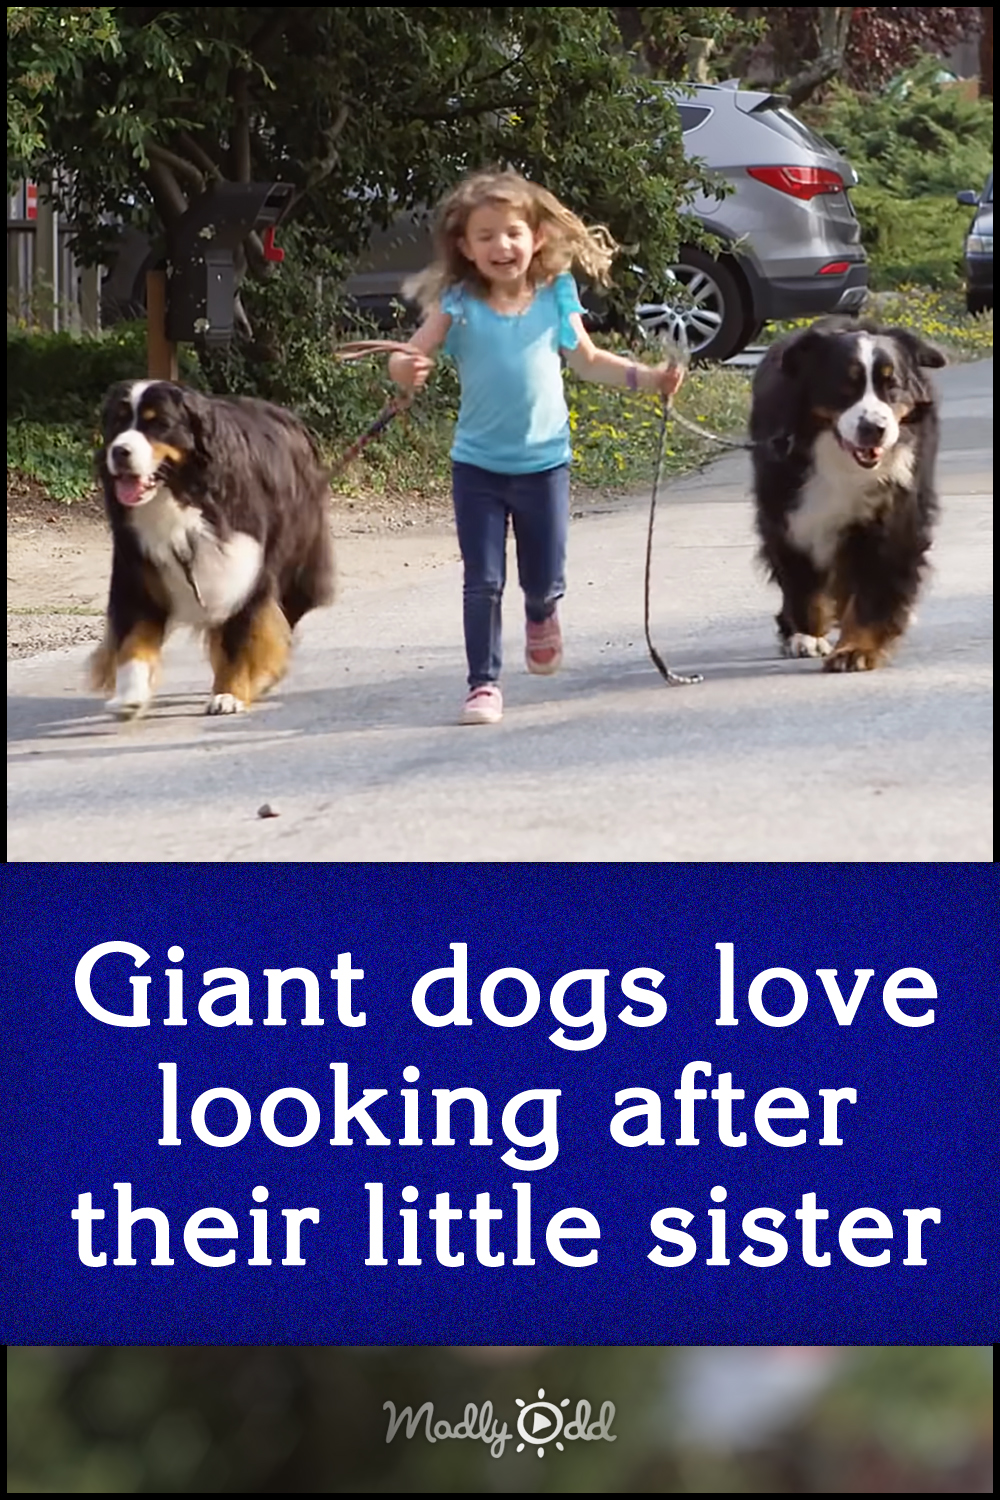 Giant dogs love looking after their little sister